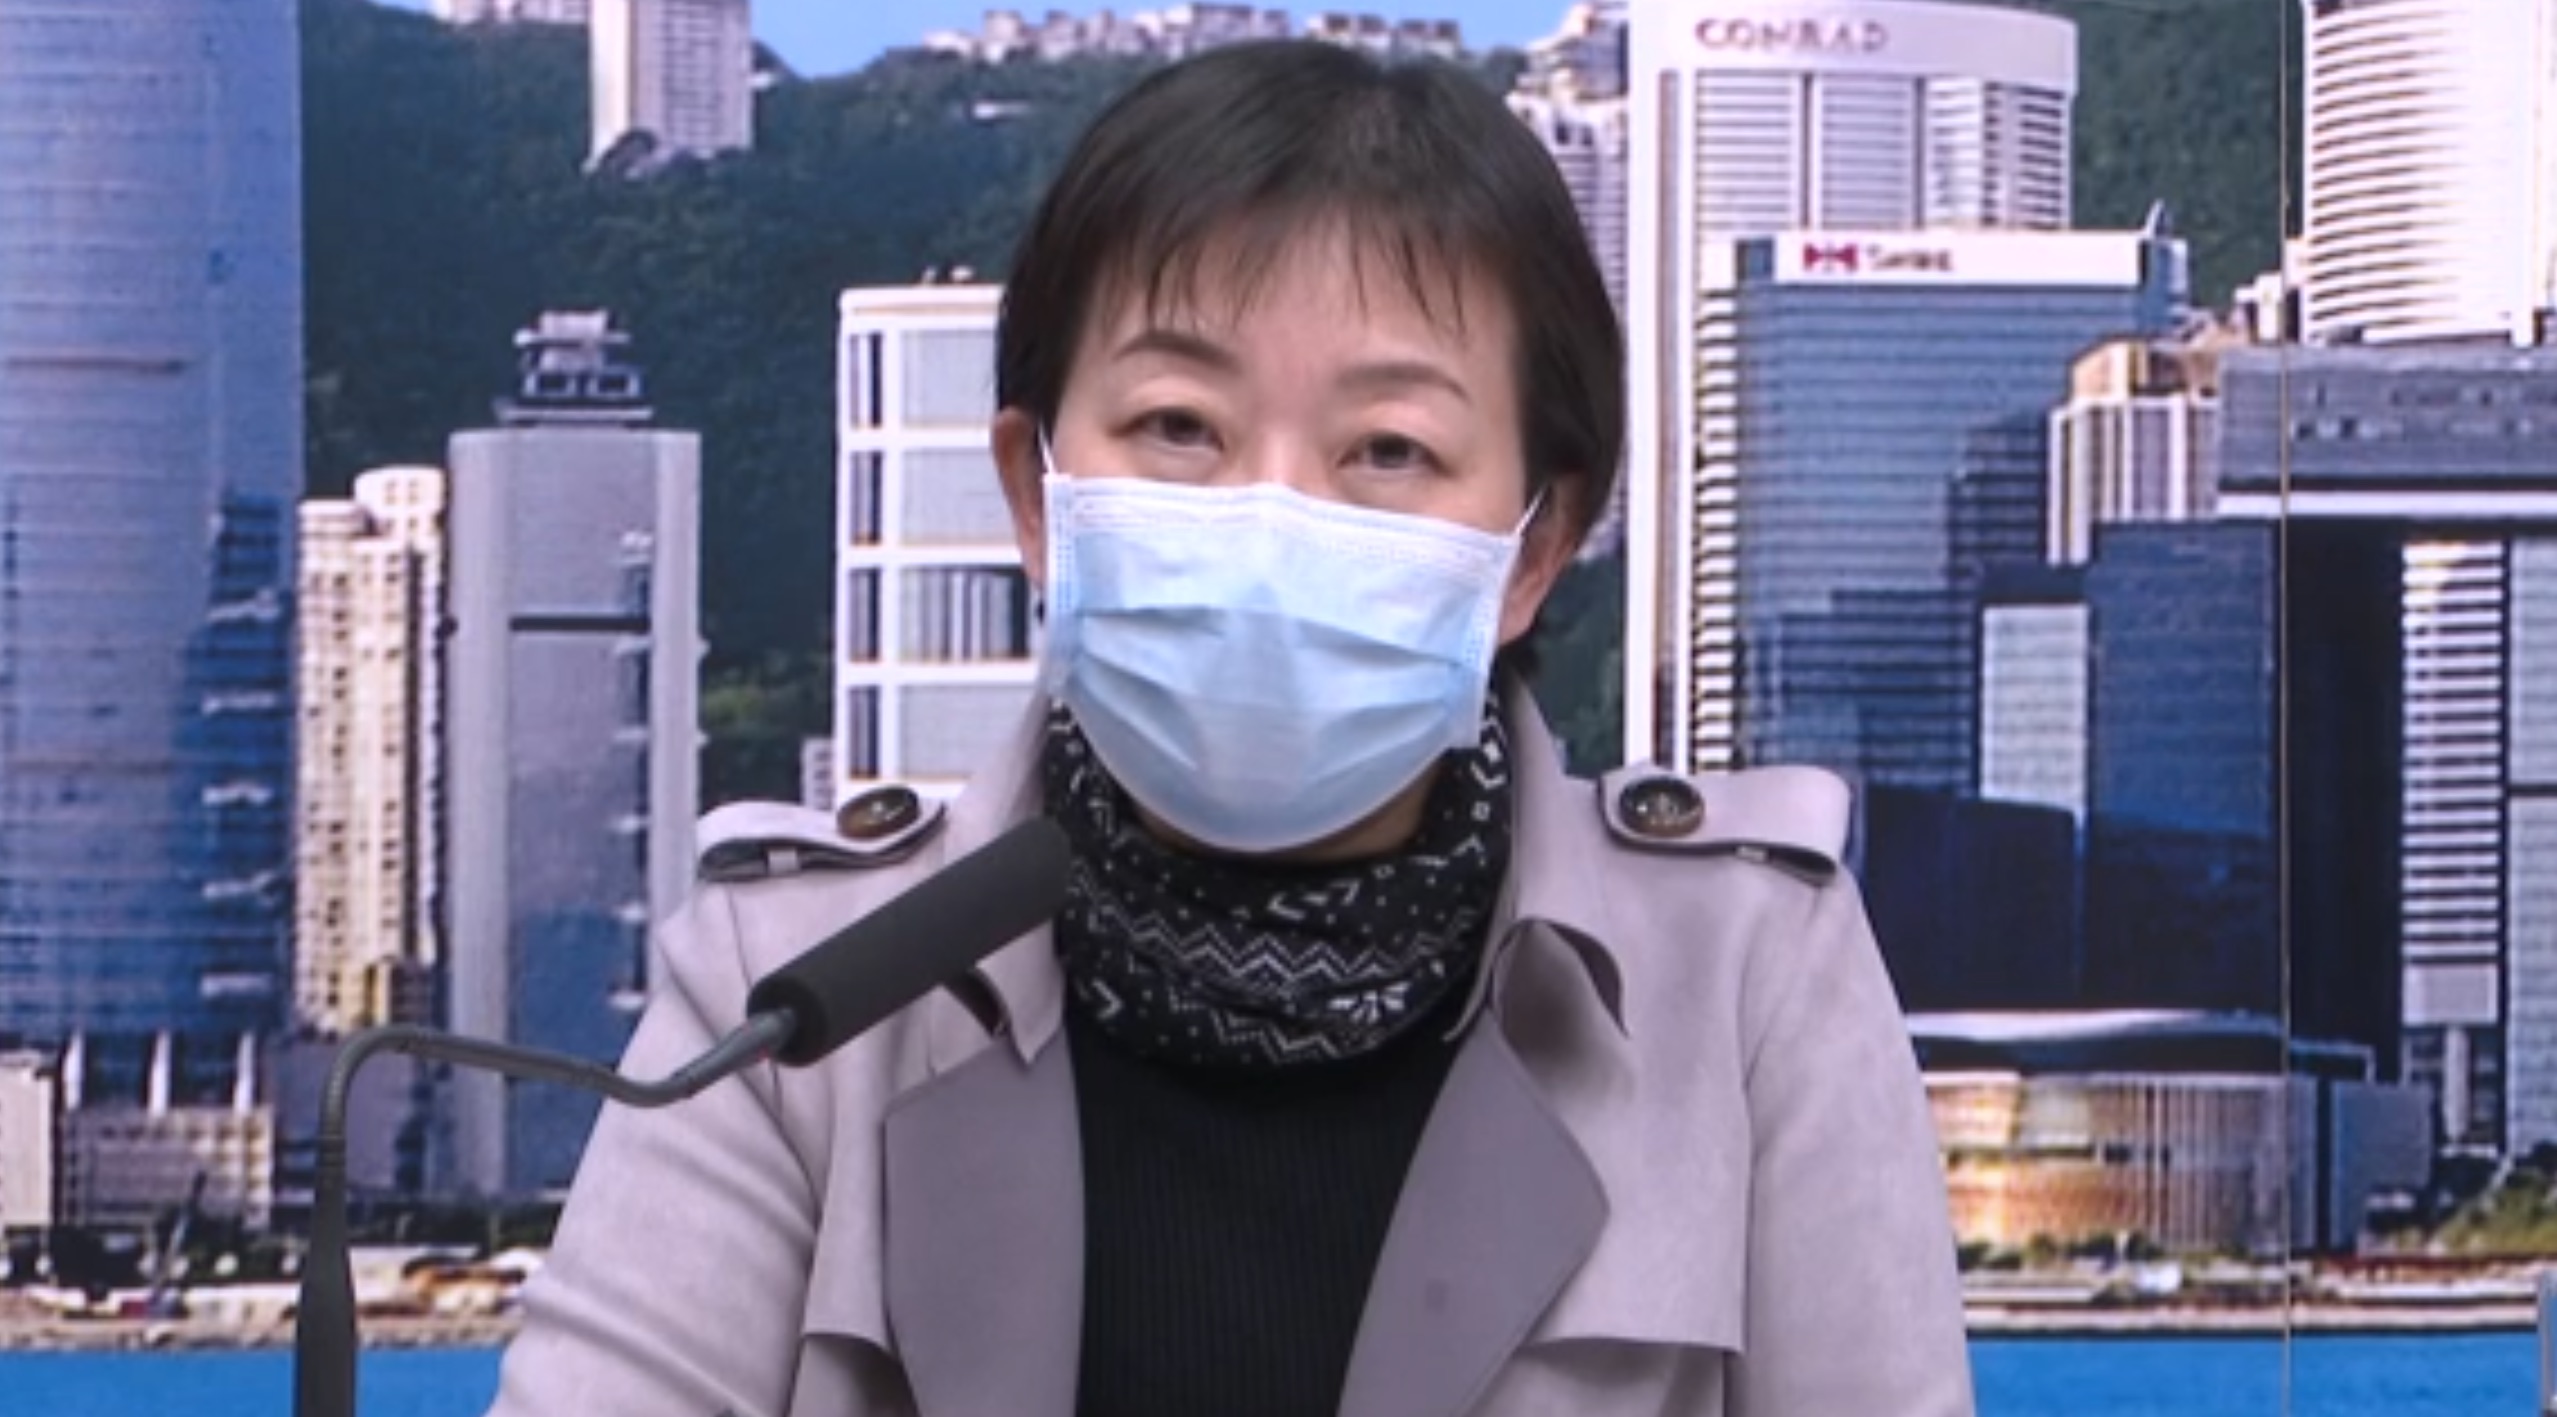 Dr. Chuang Shuk-kwan, head of the Center for Health Protection’s Communicable Disease Branch, speaks to the press about two new coronavirus cases on Thursday. Photo via GovtHK.